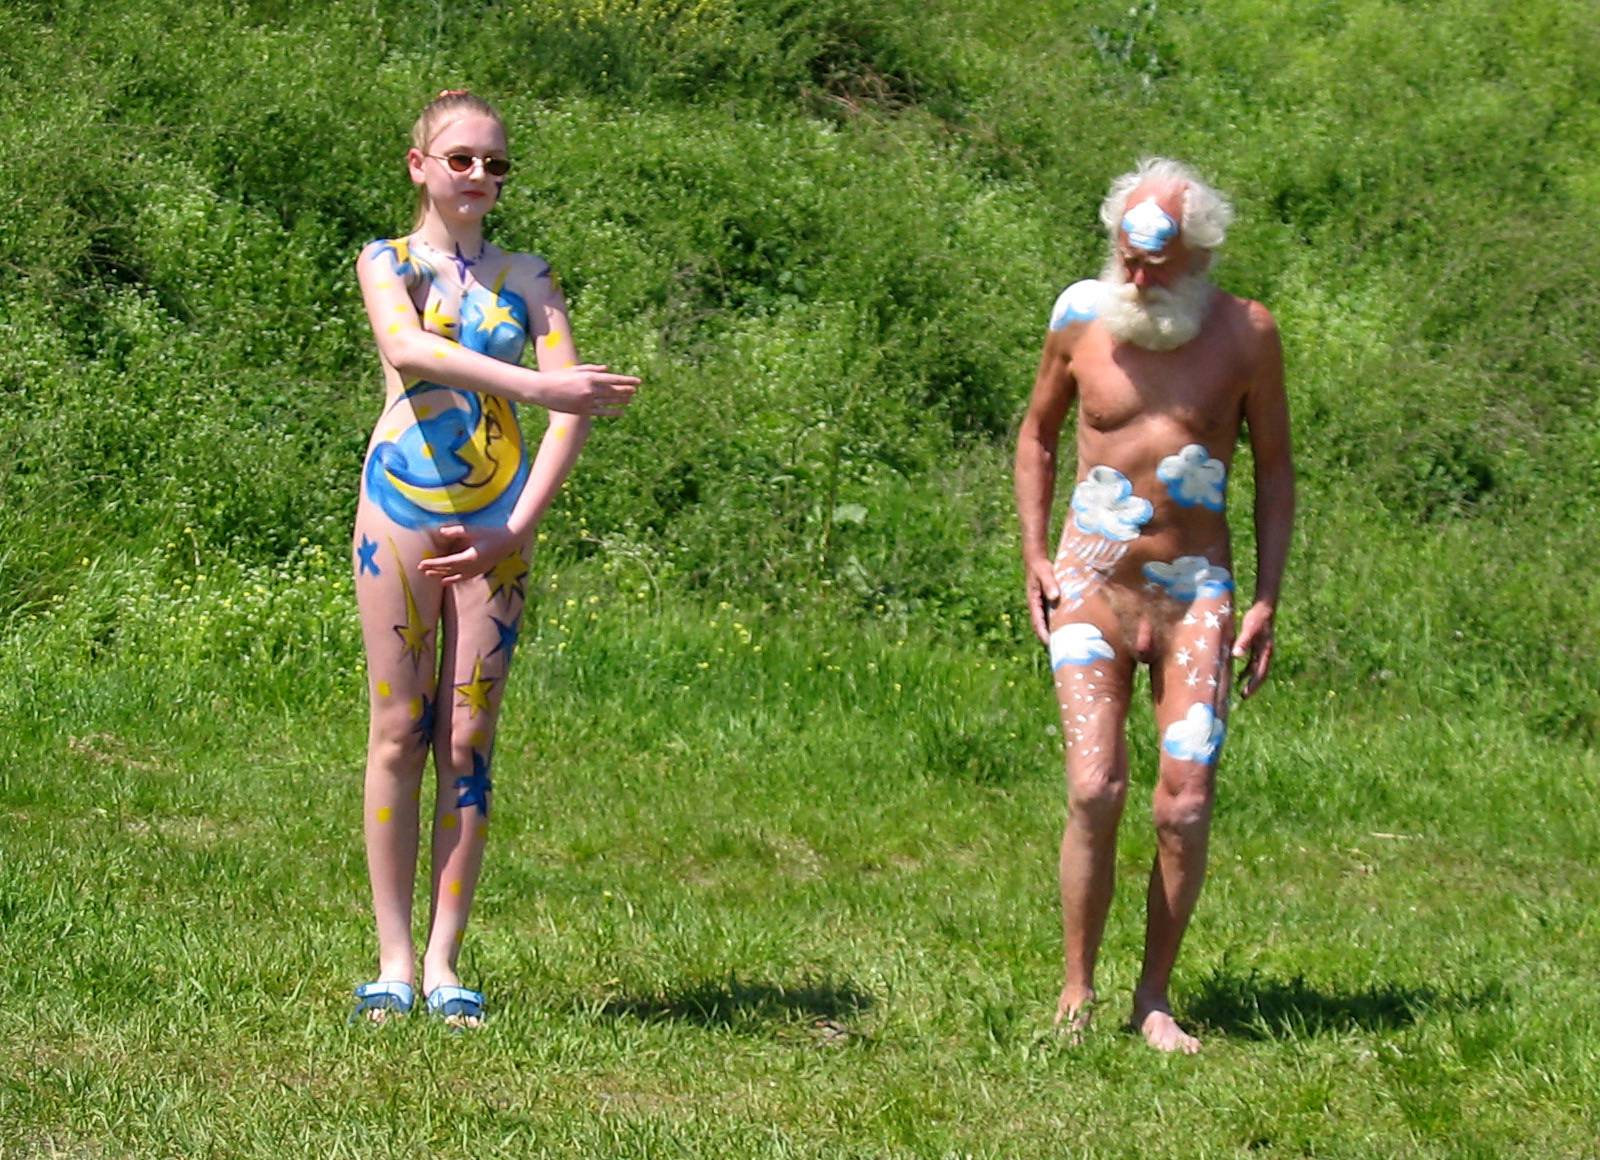 Nudist Pictures Grassy Hill Performances - 1